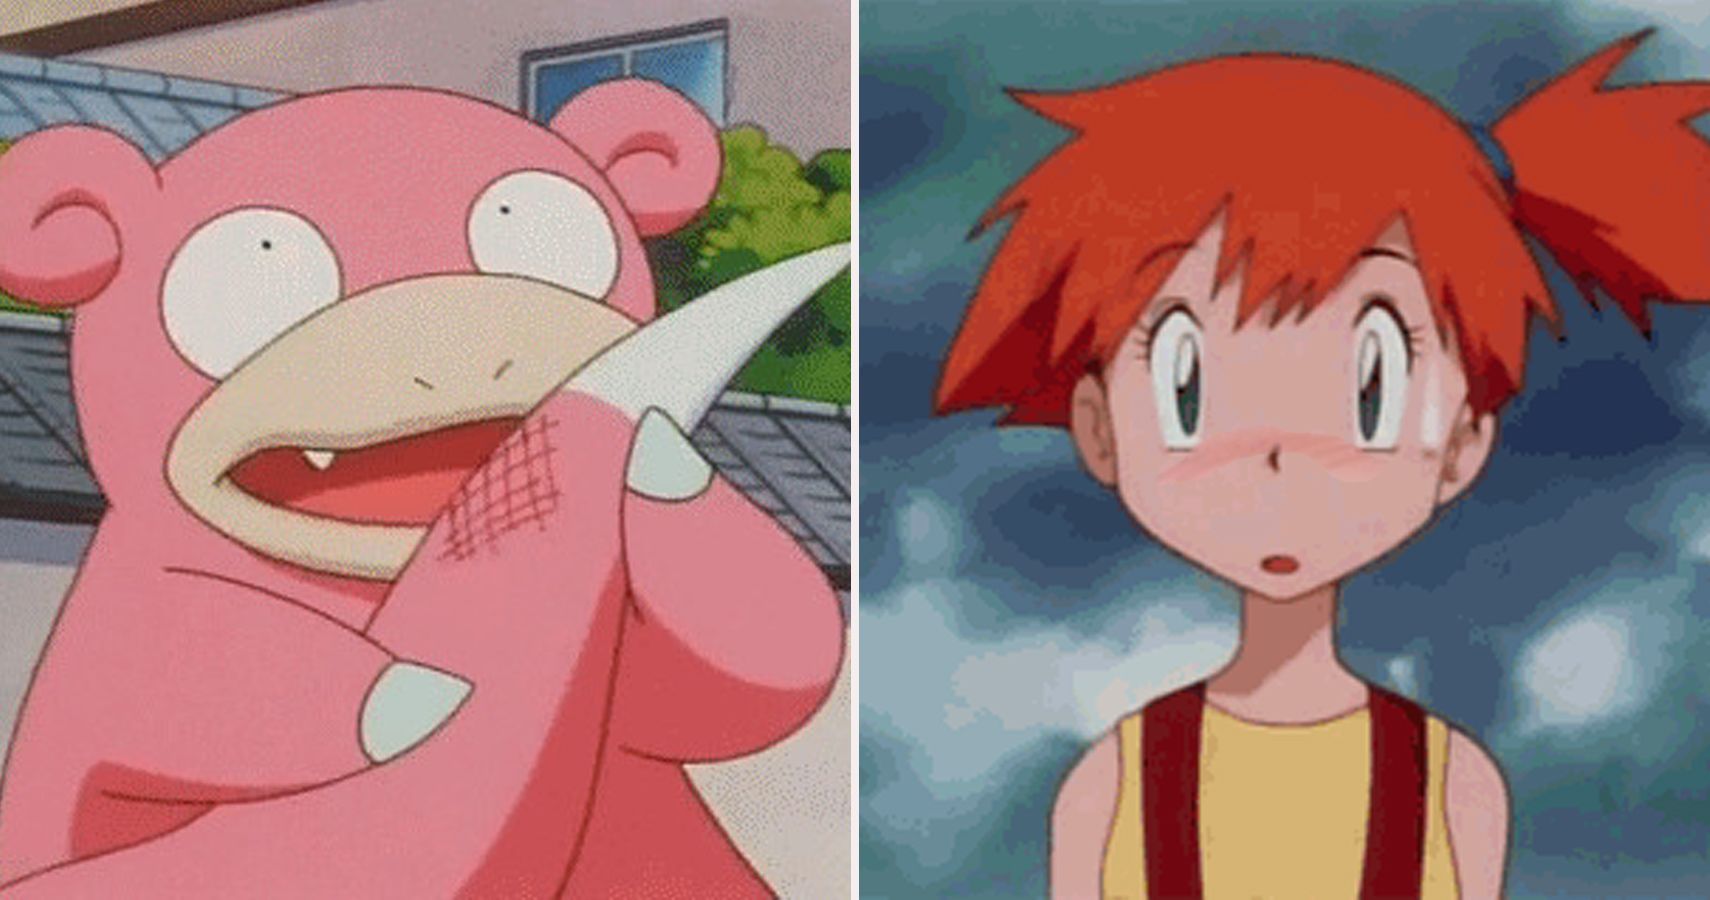 20 Of The Weirdest Things You Can Do In Pokémon